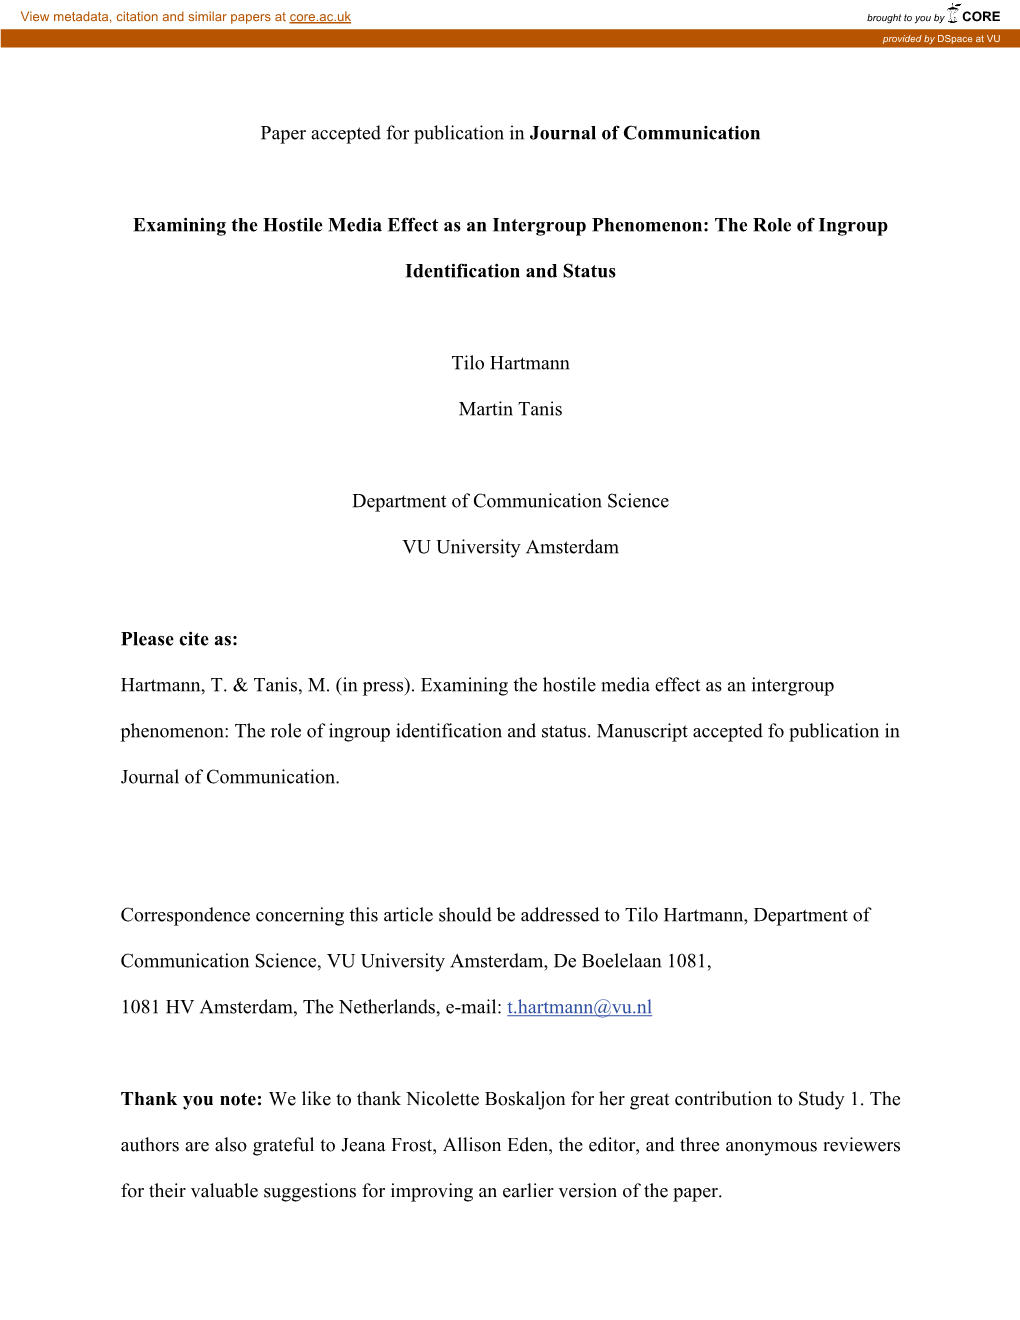 Paper Accepted for Publication in Journal of Communication